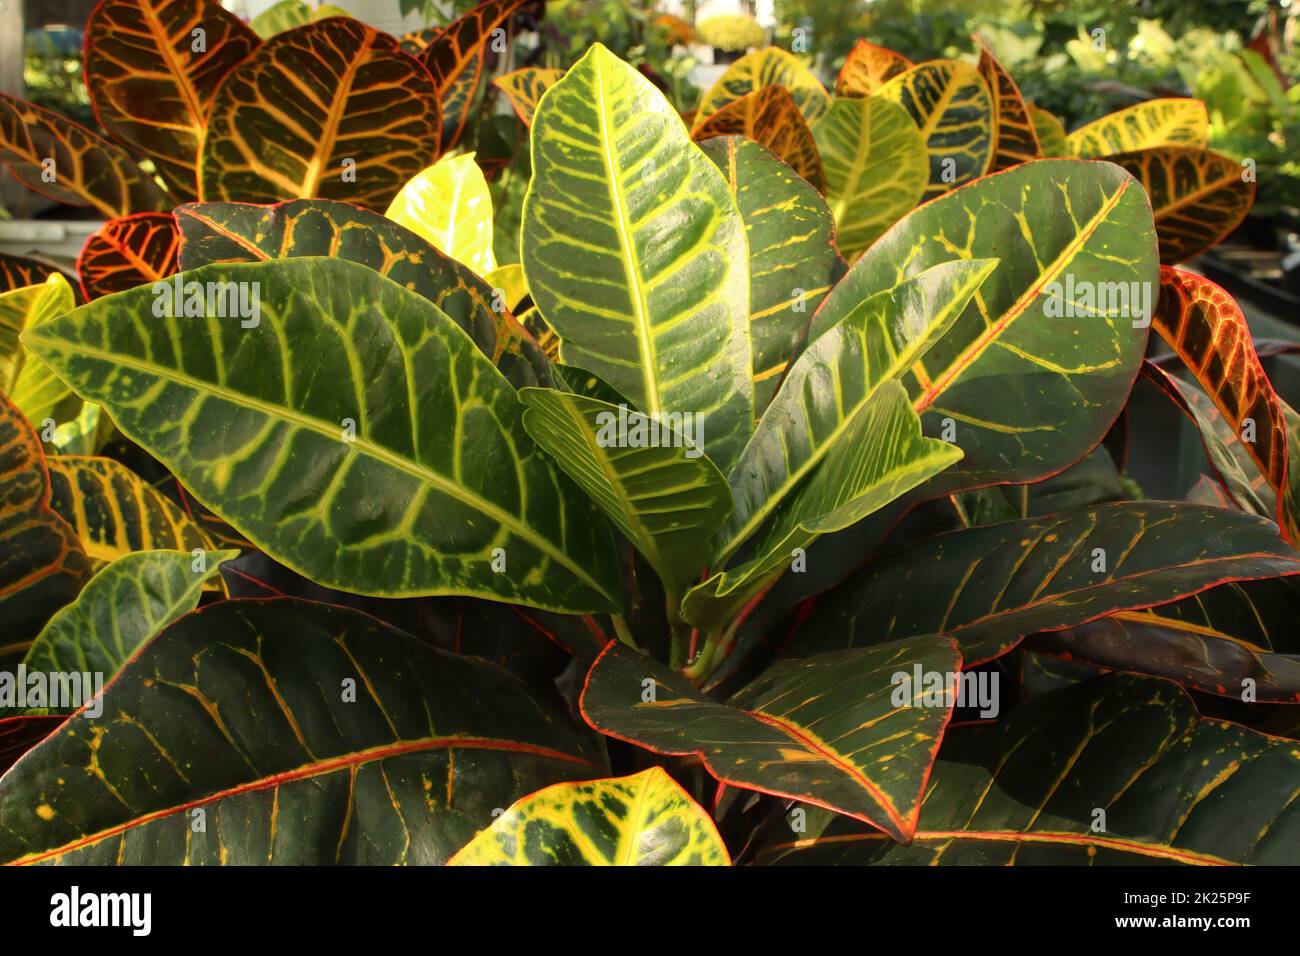 Bright yellow and green leaves on a Croton plant Stock Photo